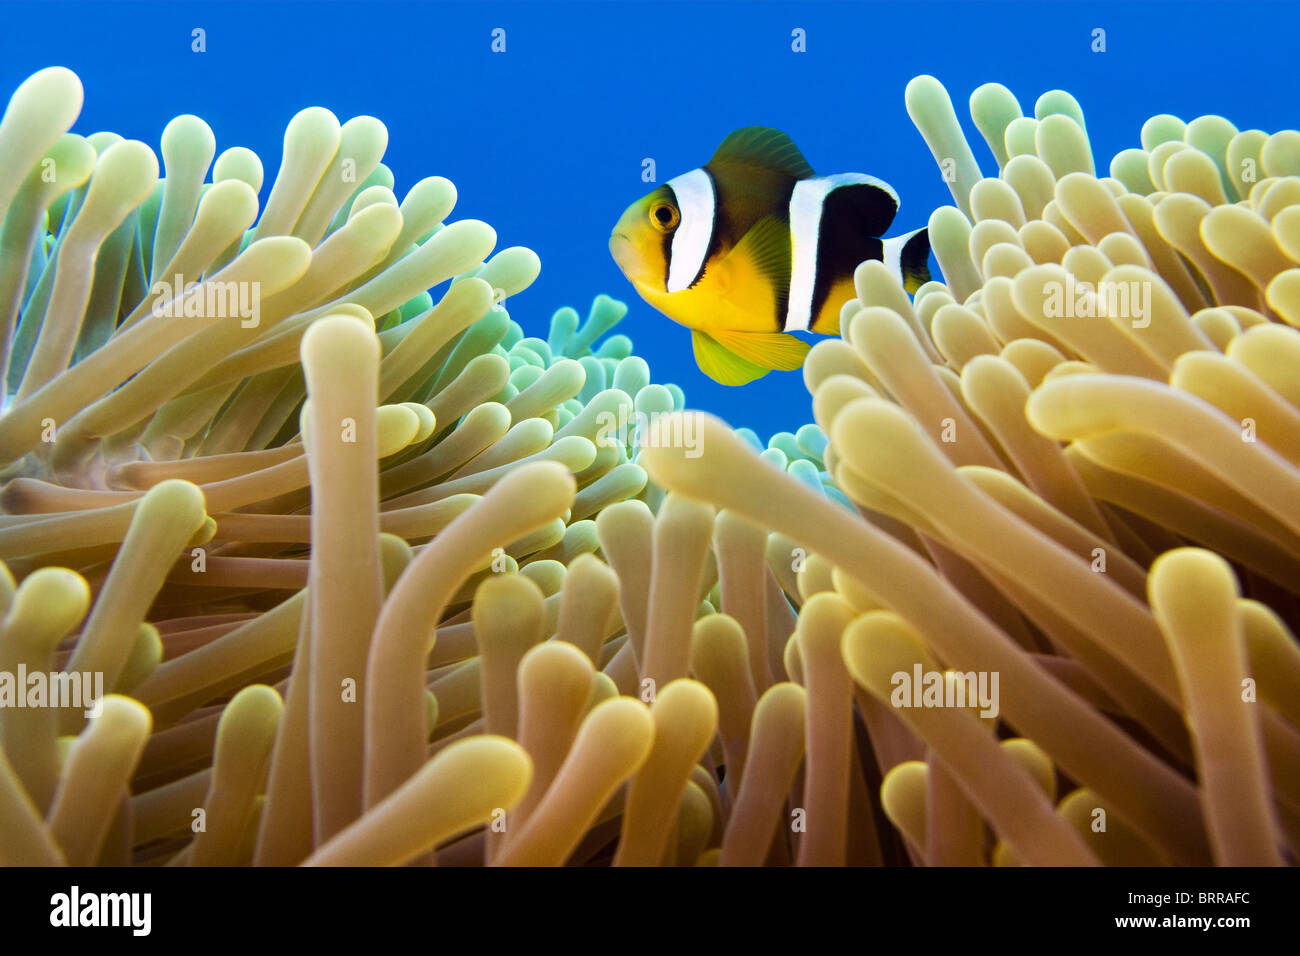 close-up of clownfish in anemone Stock Photo